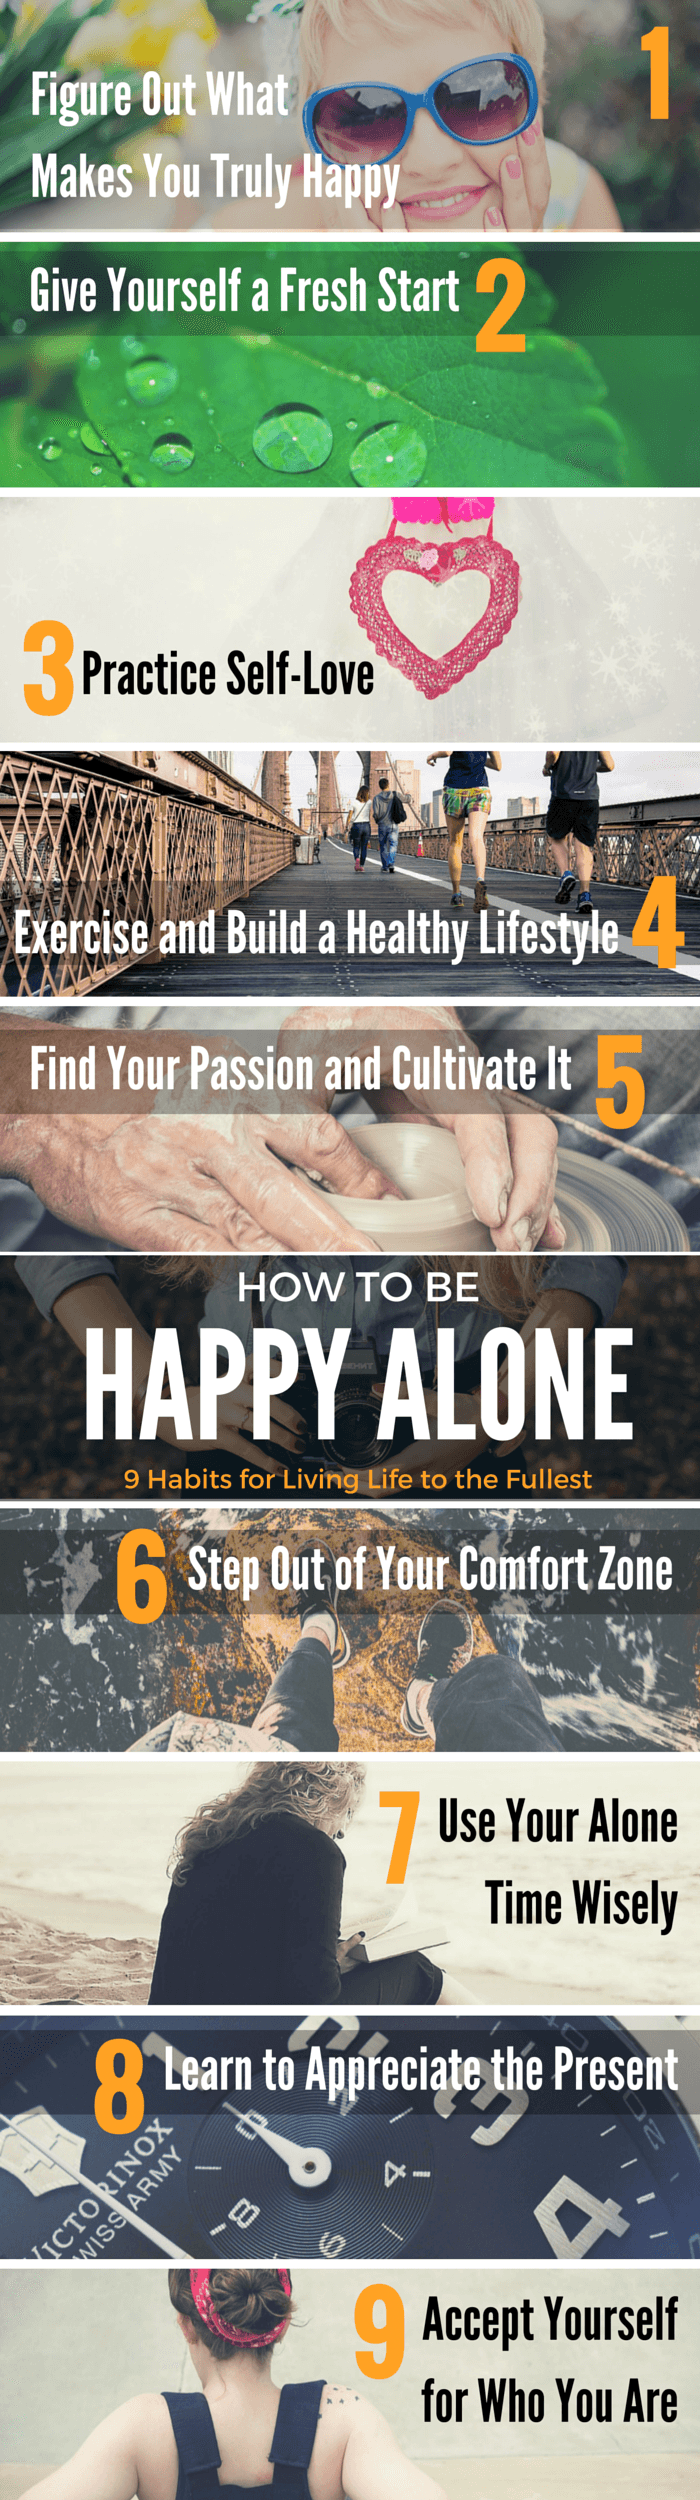 How to Be Happy Alone and Live a Full Life